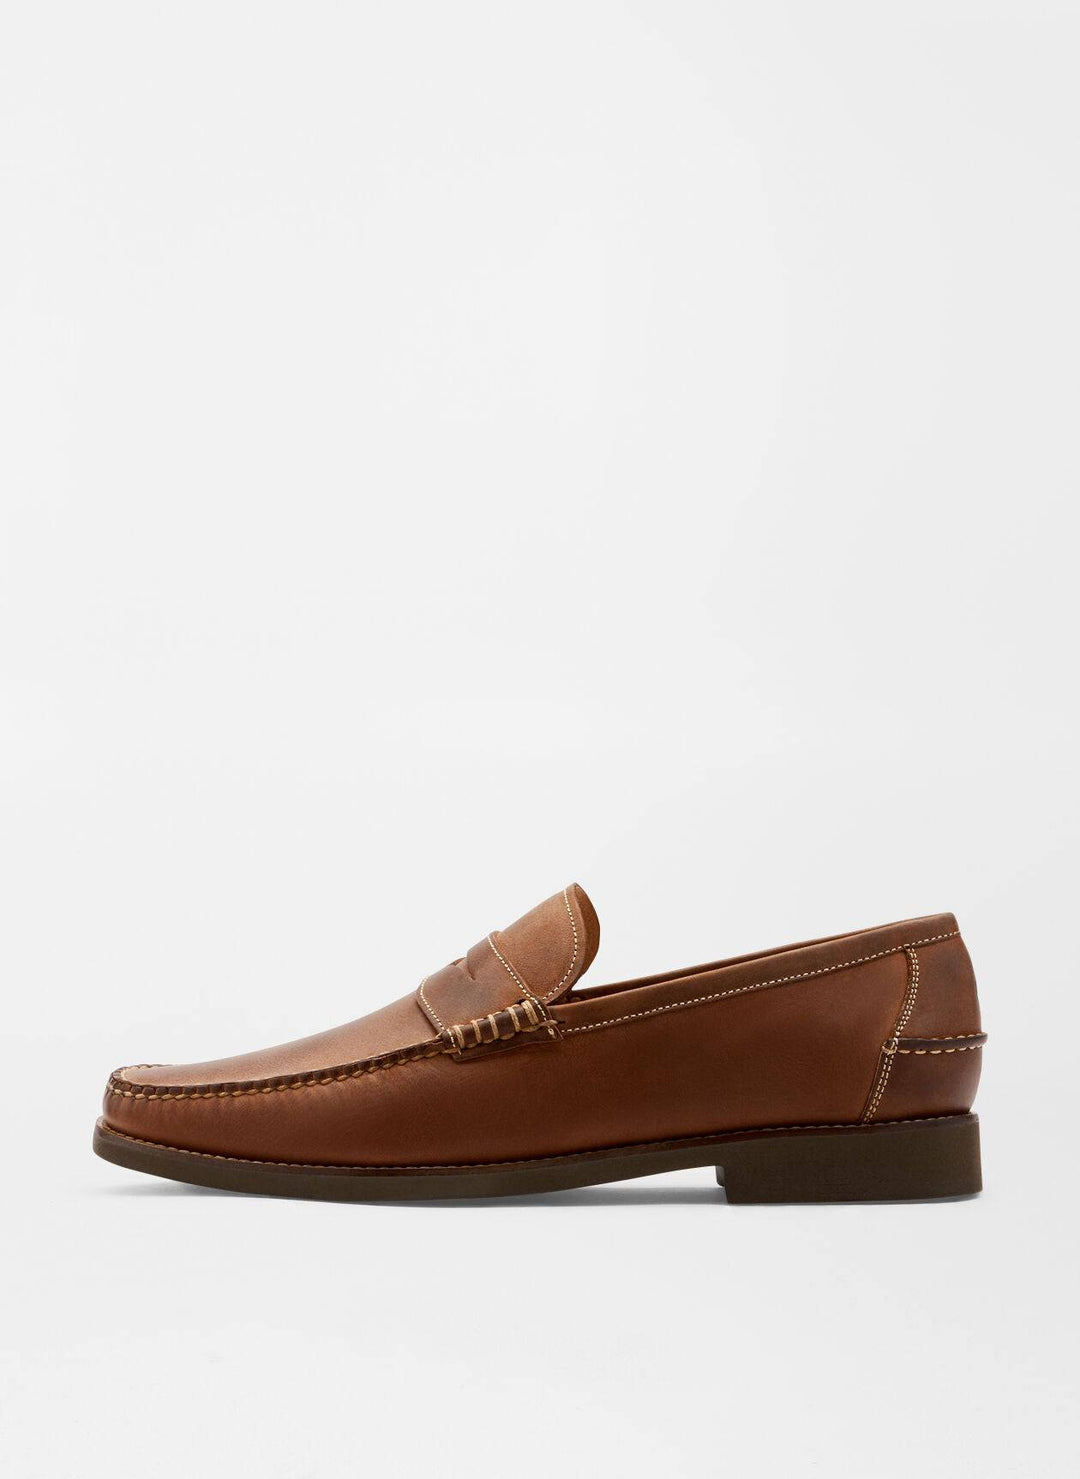 Peter Millar Handsewn Leather Penny Loafer